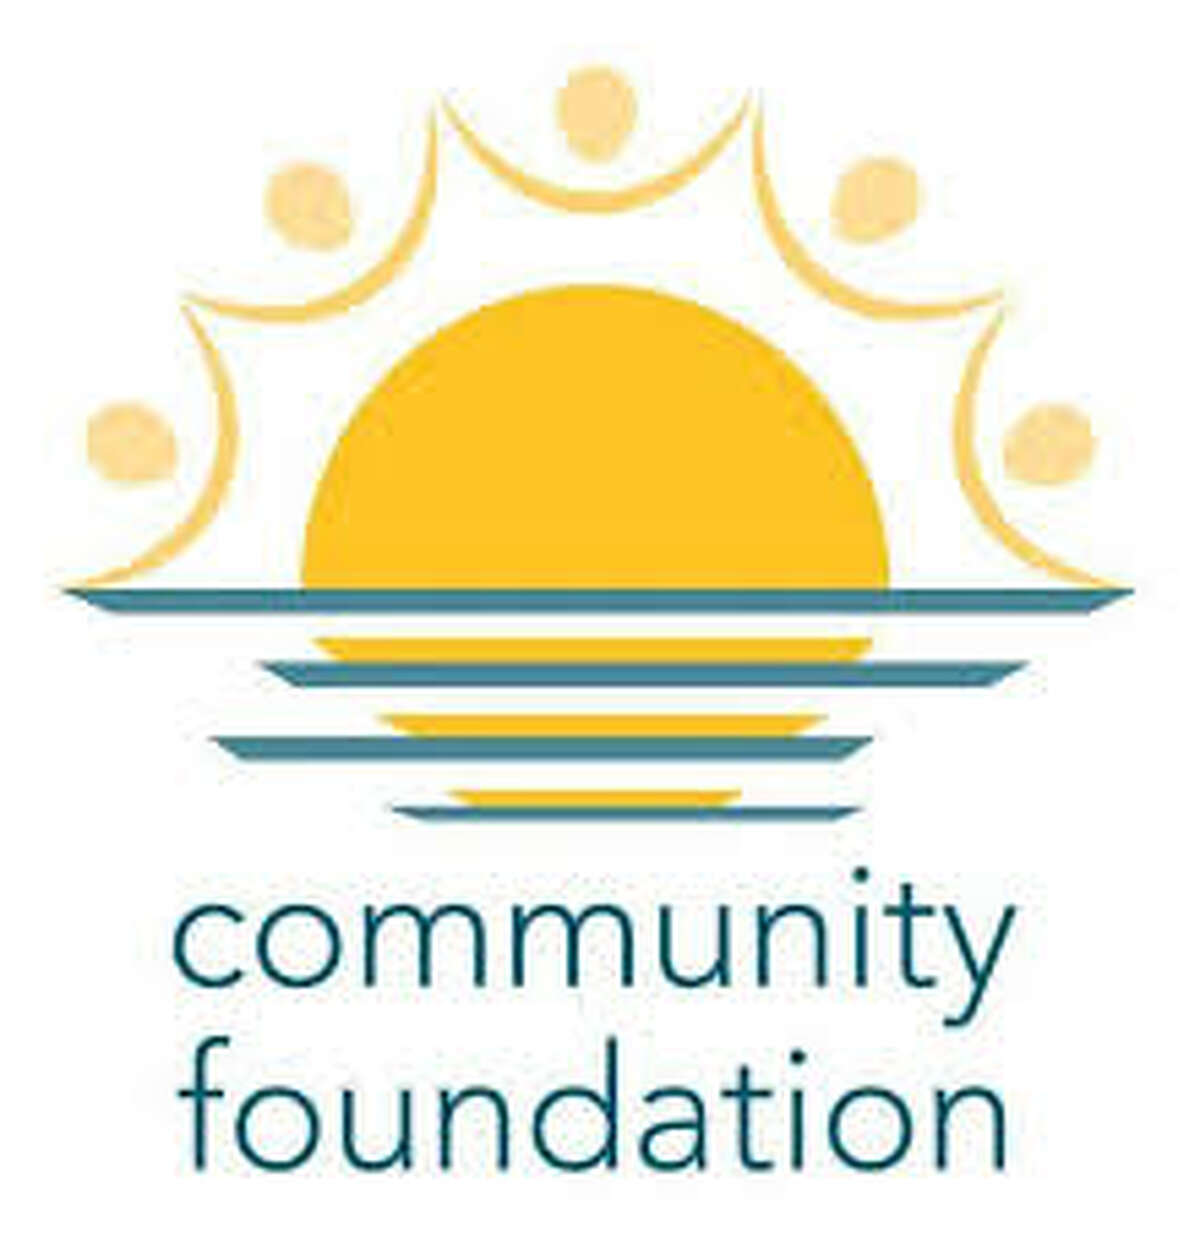 Community Foundation received $20K Consumers Energy Foundation to support diversity, equity, and inclusion efforts.